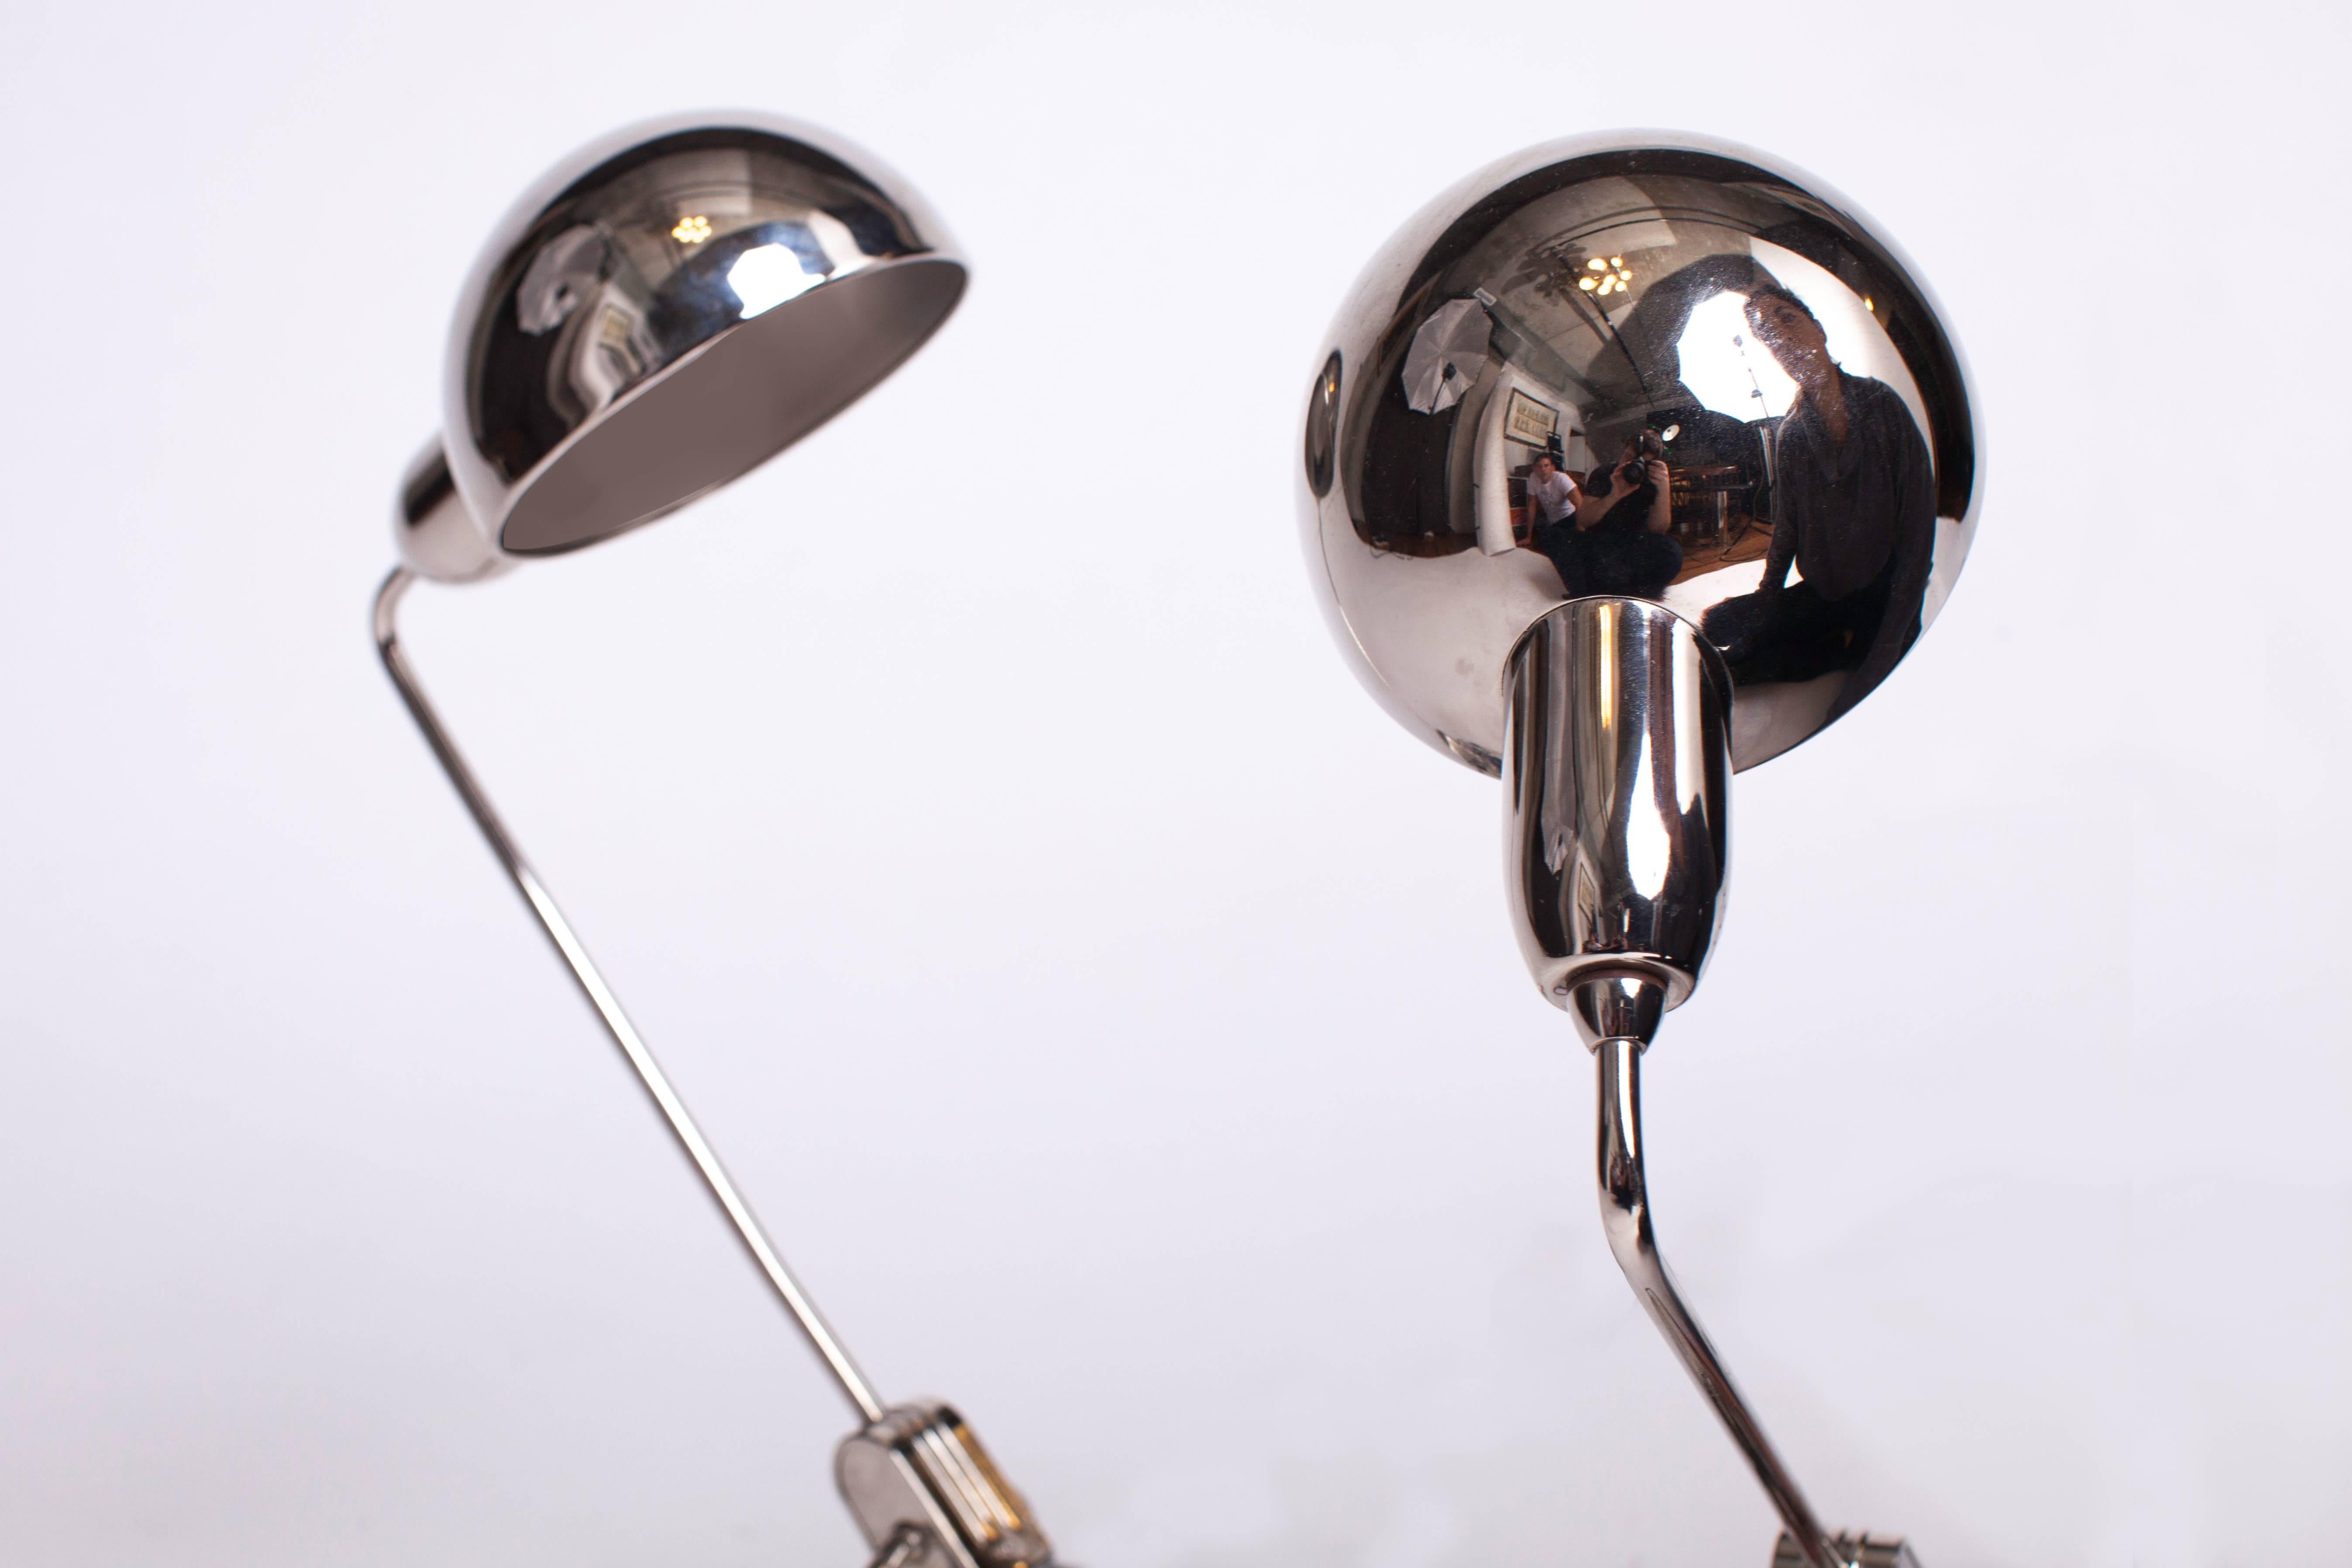 French Charlotte Perriand Selected Pair of Jumo 600 Chrome Table Lamps, France c. 1949